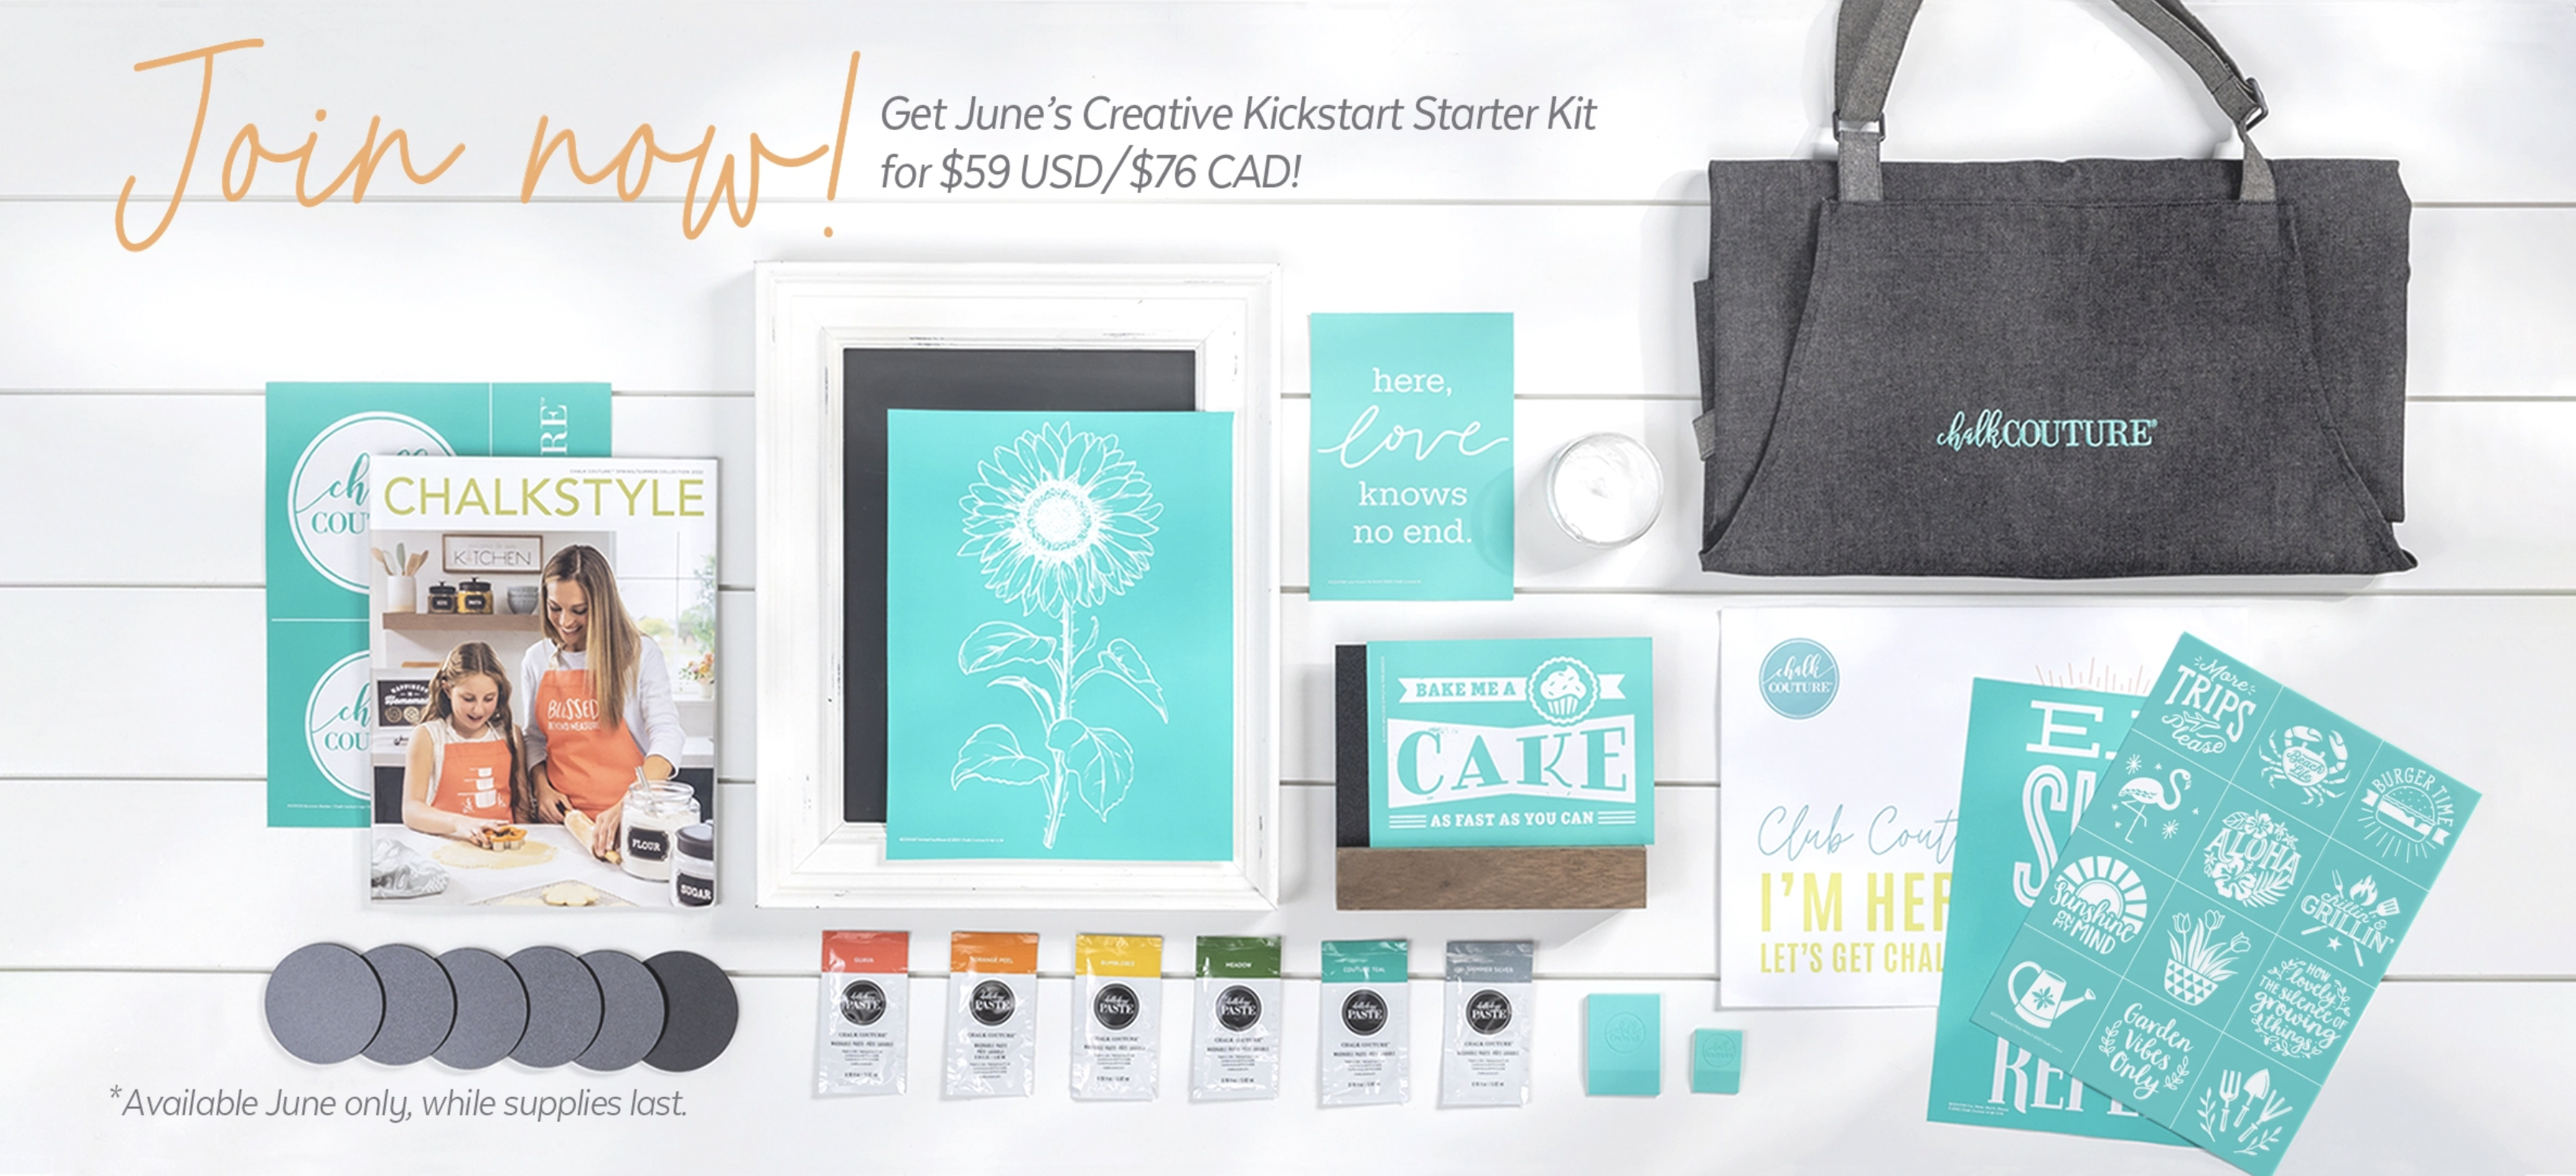 Get Creative at a Great Price $59 Starter Kit!